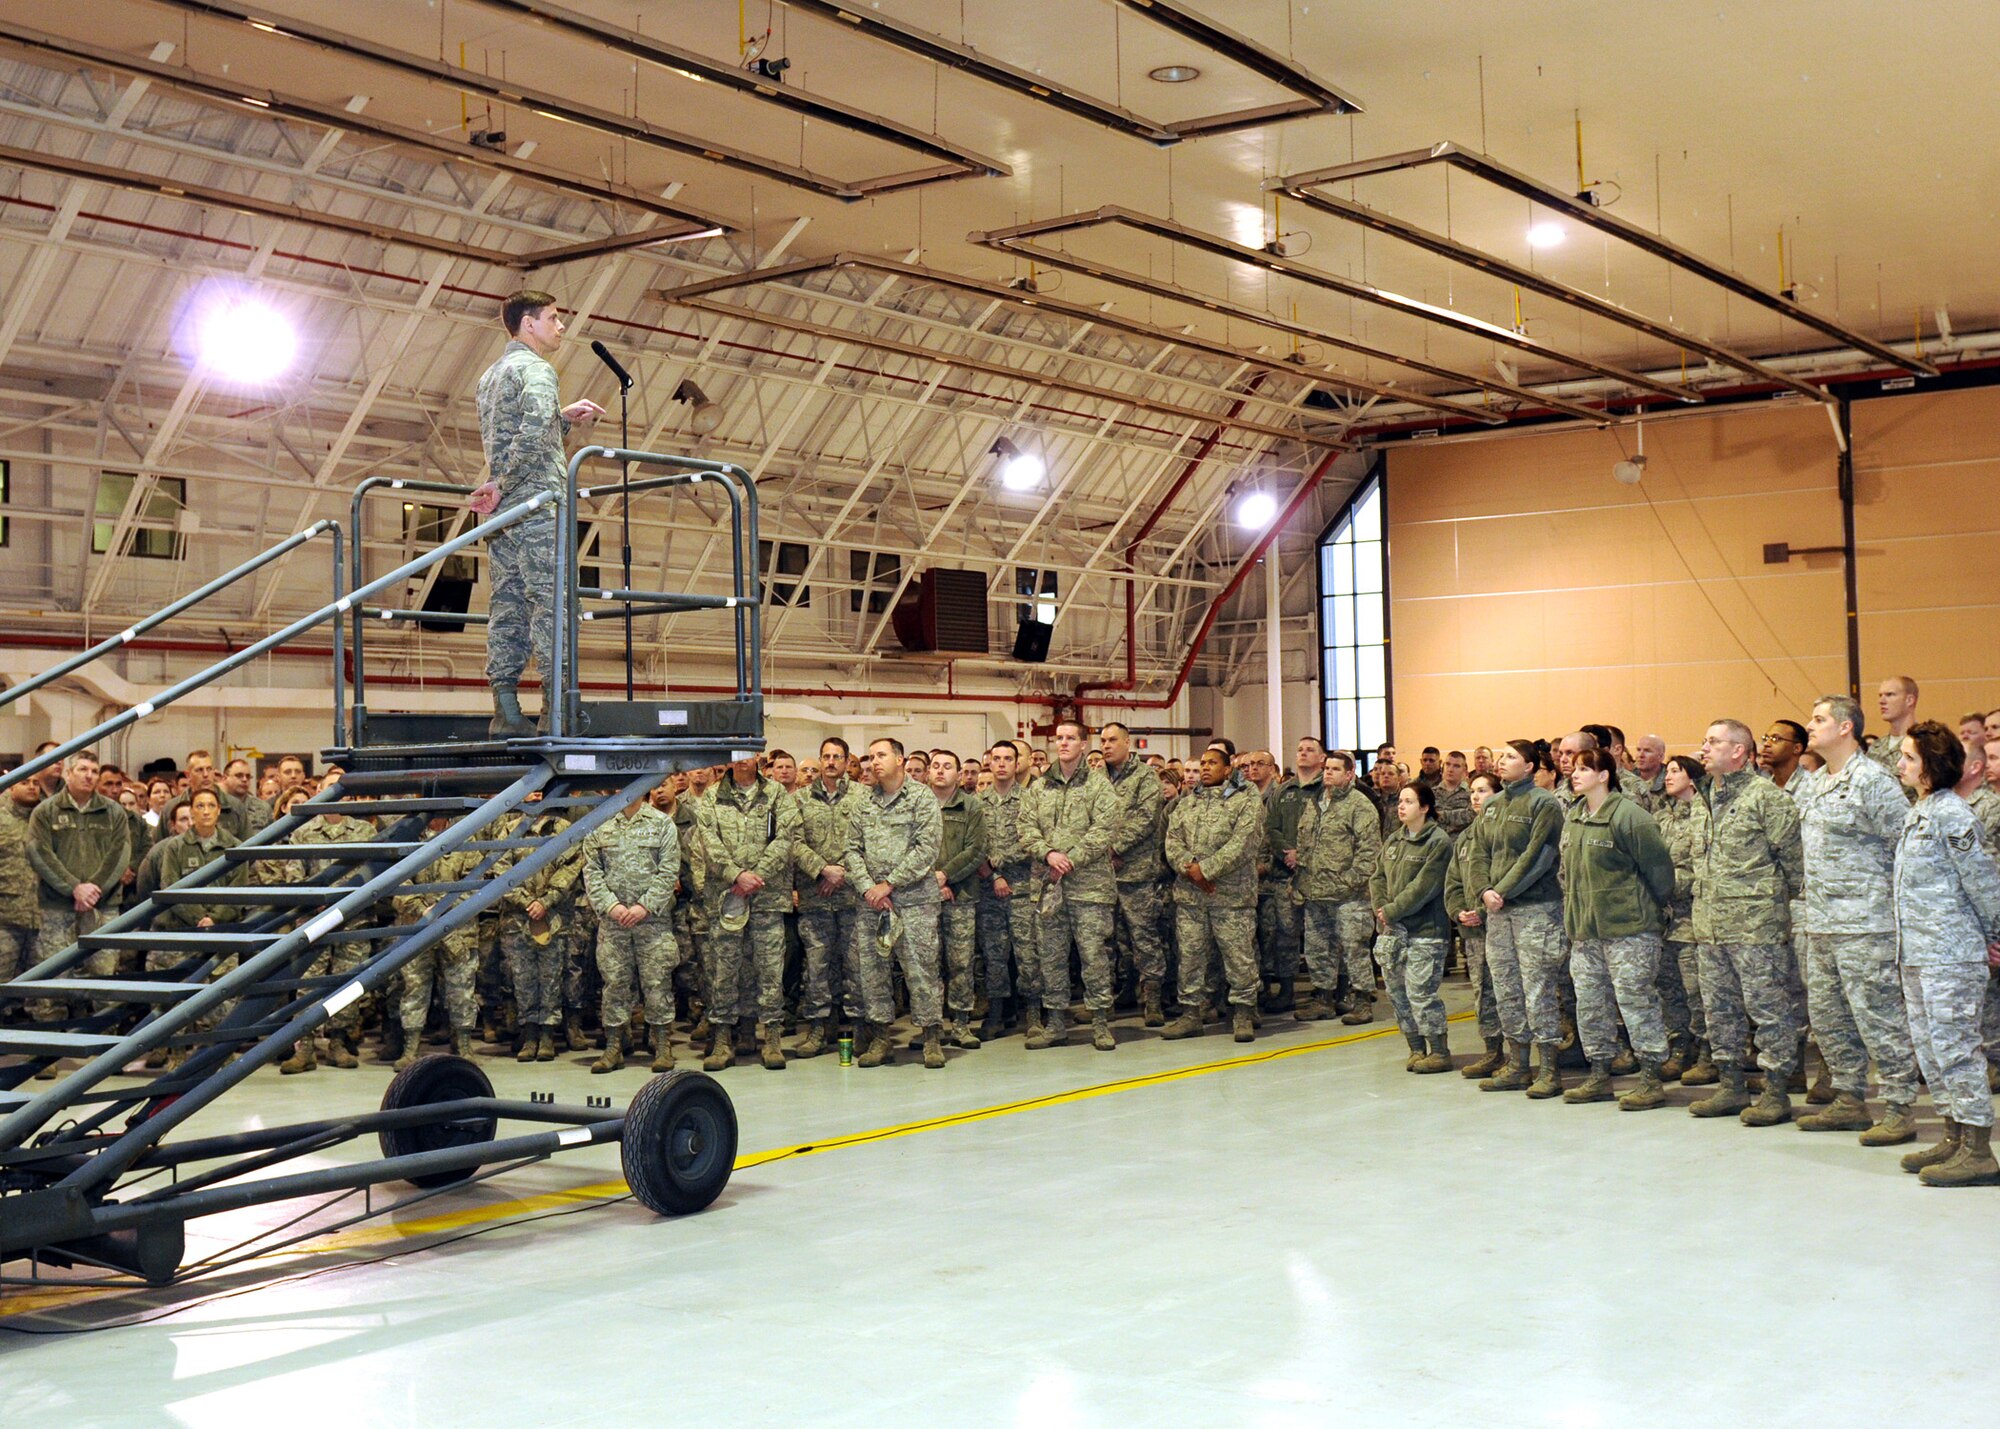 New York Air National Guard Col. Greg A. Semmel addresses members of Hancock Field Air National Guard Base as the newly selected 174th Fighter Wing Commander on February 4, 2012.  Semmel has served as Assistant Vice Commander and Operations Group Commander for the 174th Fighter Wing, as well as an operational test/evaluation pilot at Eglin Air Force Base, Florida and an instructor at the U.S. Air Force Fighter Weapons School at Nellis Air Force Base, Nevada.  He will assume commander during a ceremony held on March 4, 2012. (New York Air National Guard photo by Tech. Sgt. Jeremy M. Call/Released)